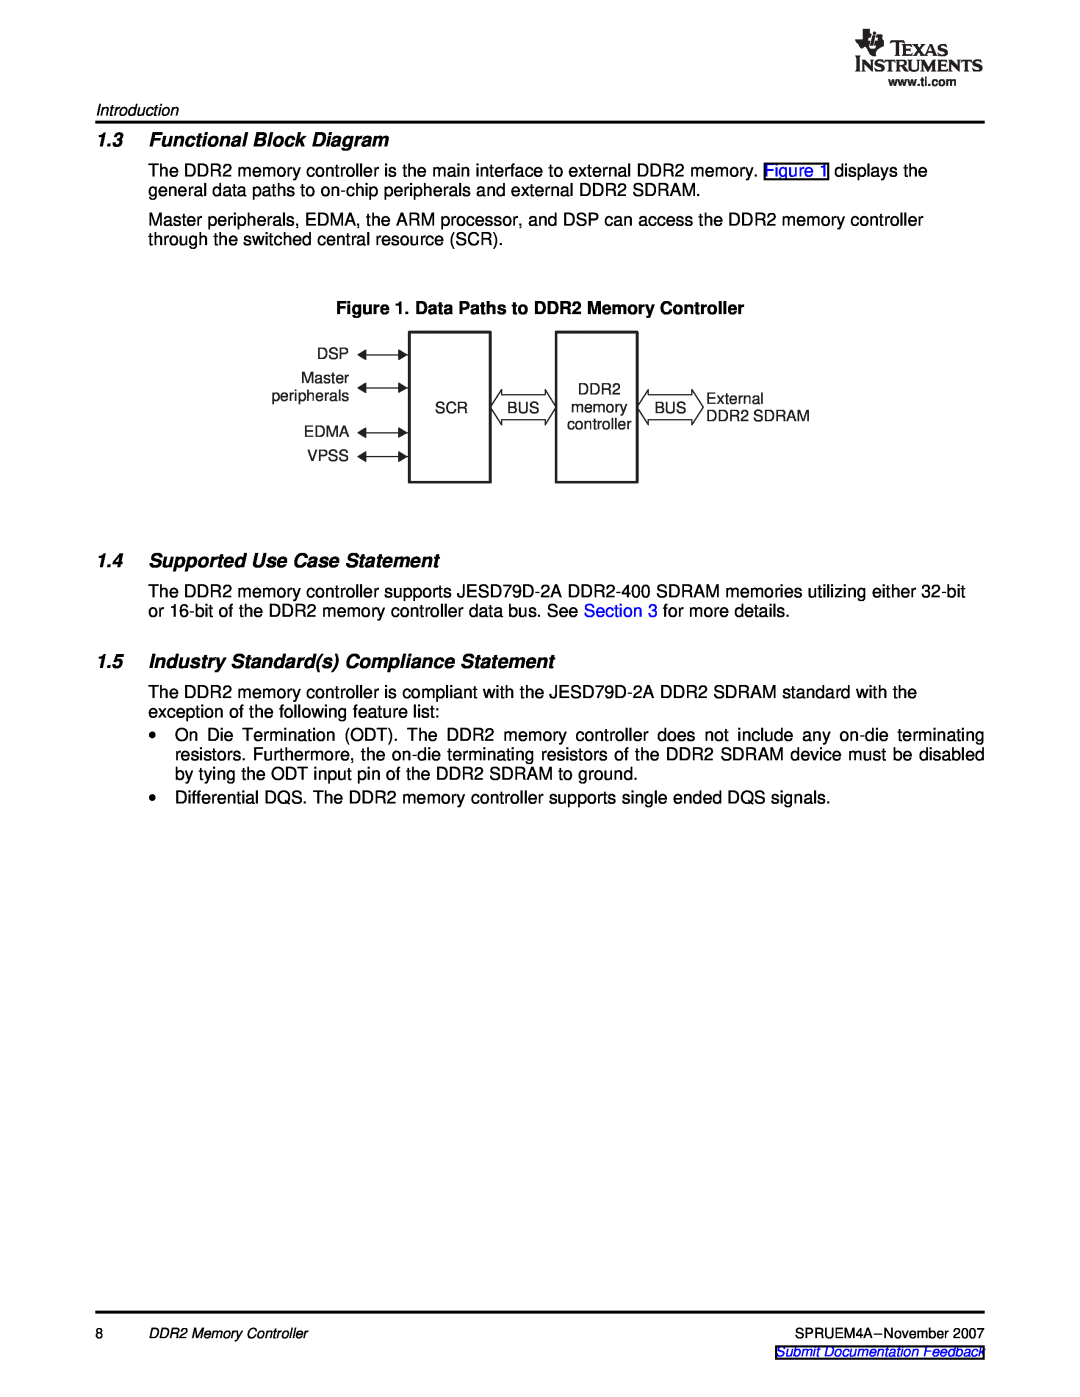 Texas Instruments TMS320C642x DSP manual Functional Block Diagram, Supported Use Case Statement 